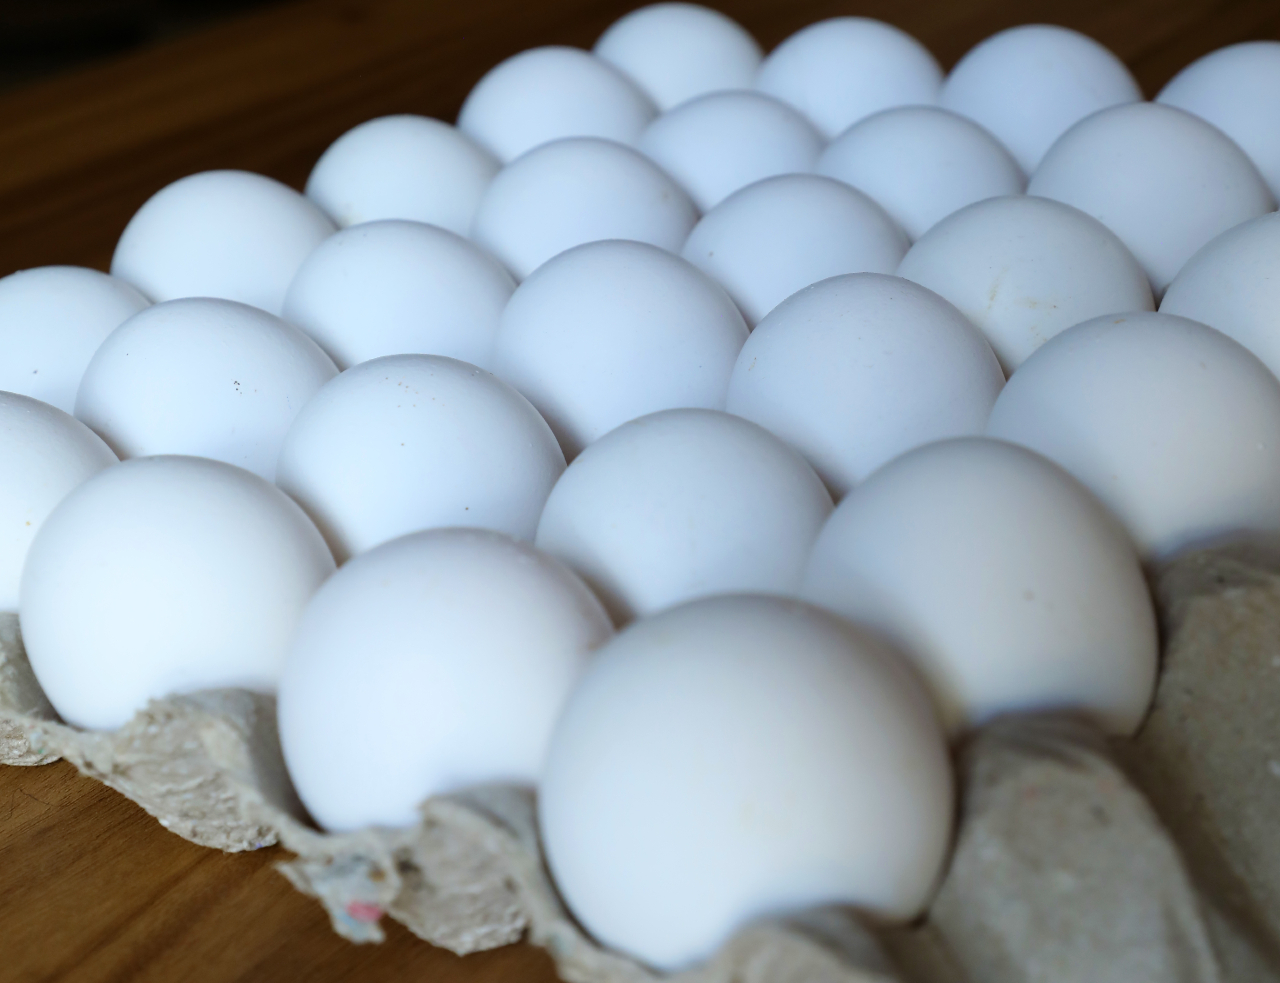 egg suppliers in bangalore